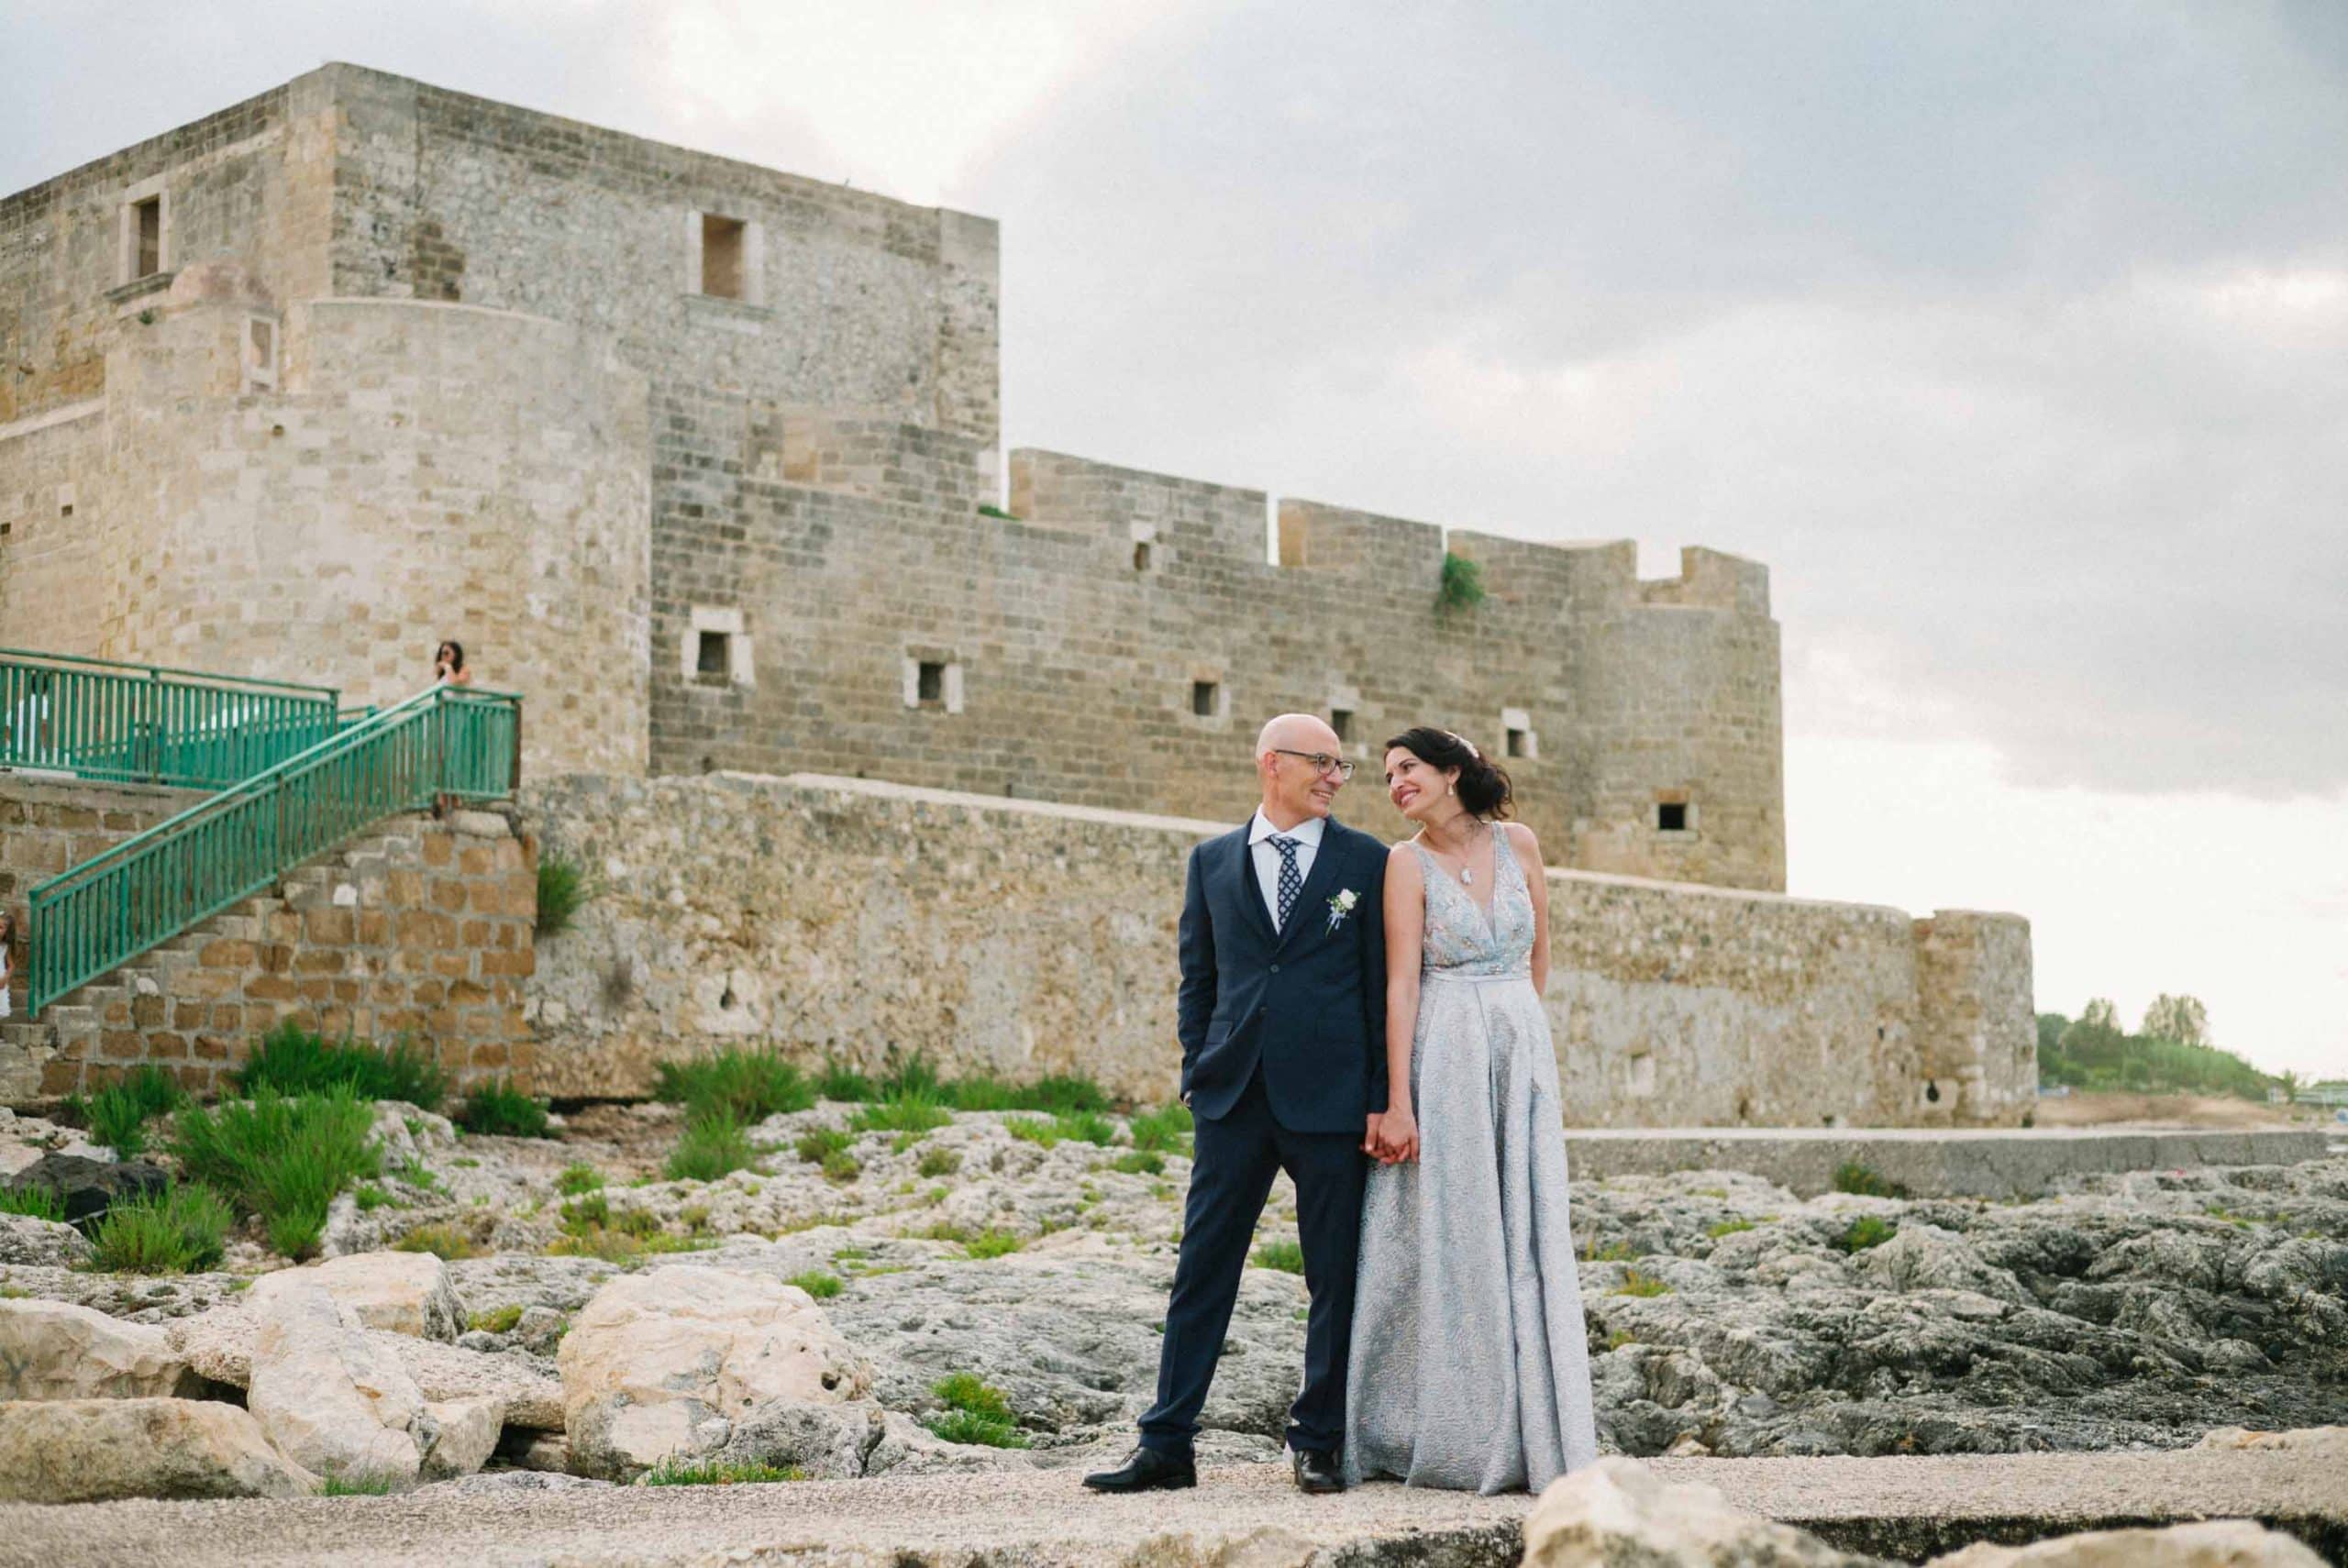 get married in Sicily - glam